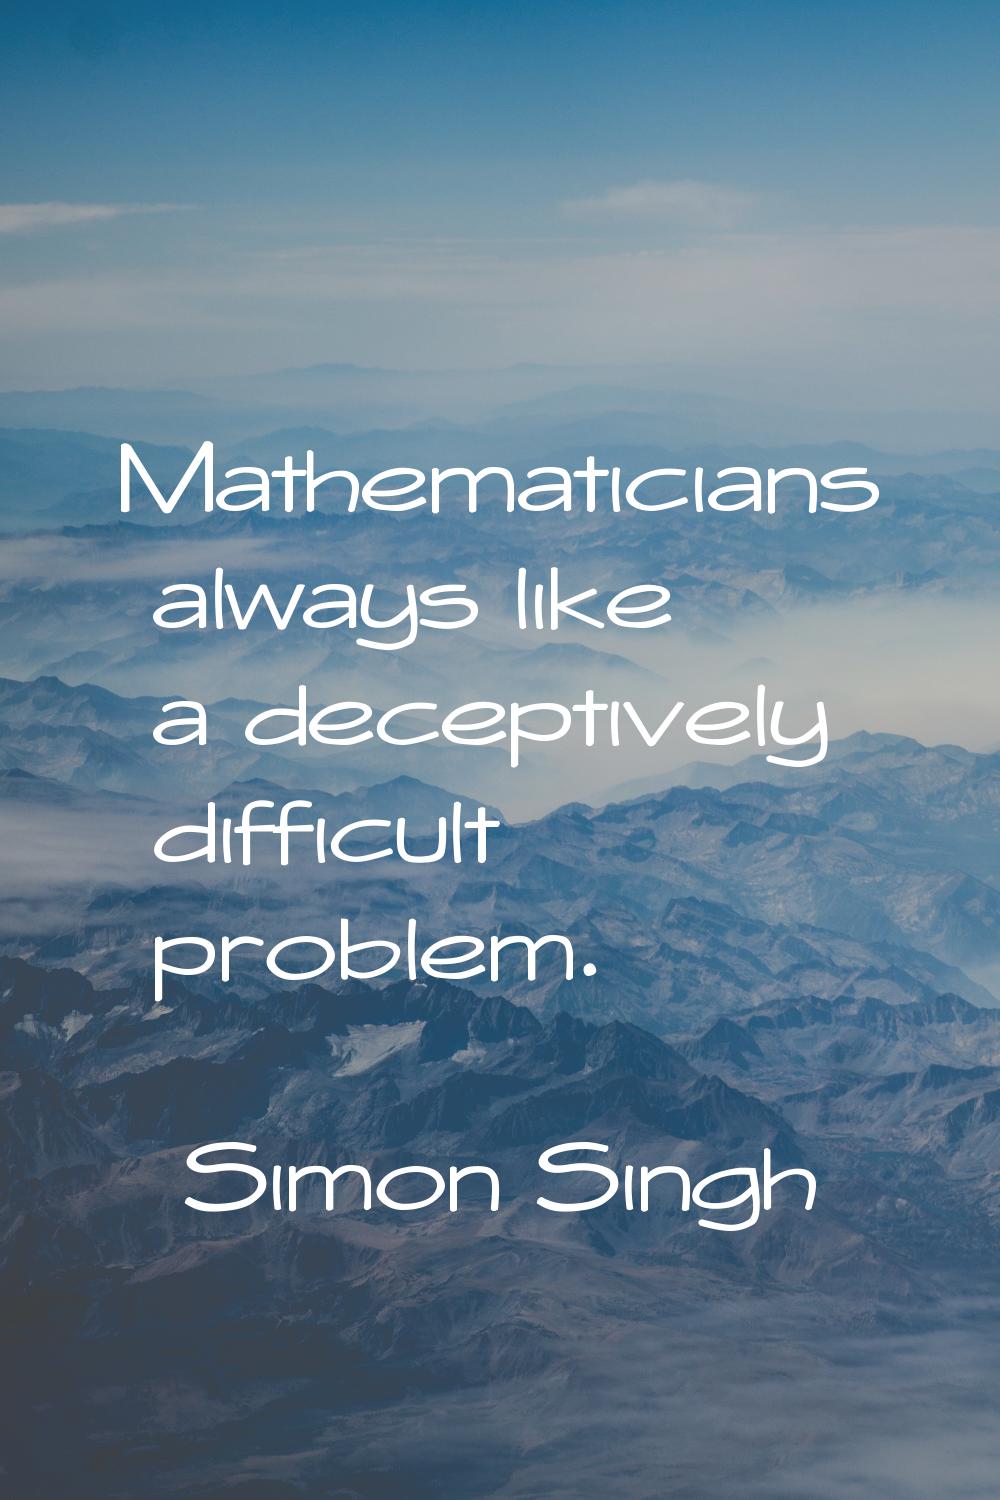 Mathematicians always like a deceptively difficult problem.